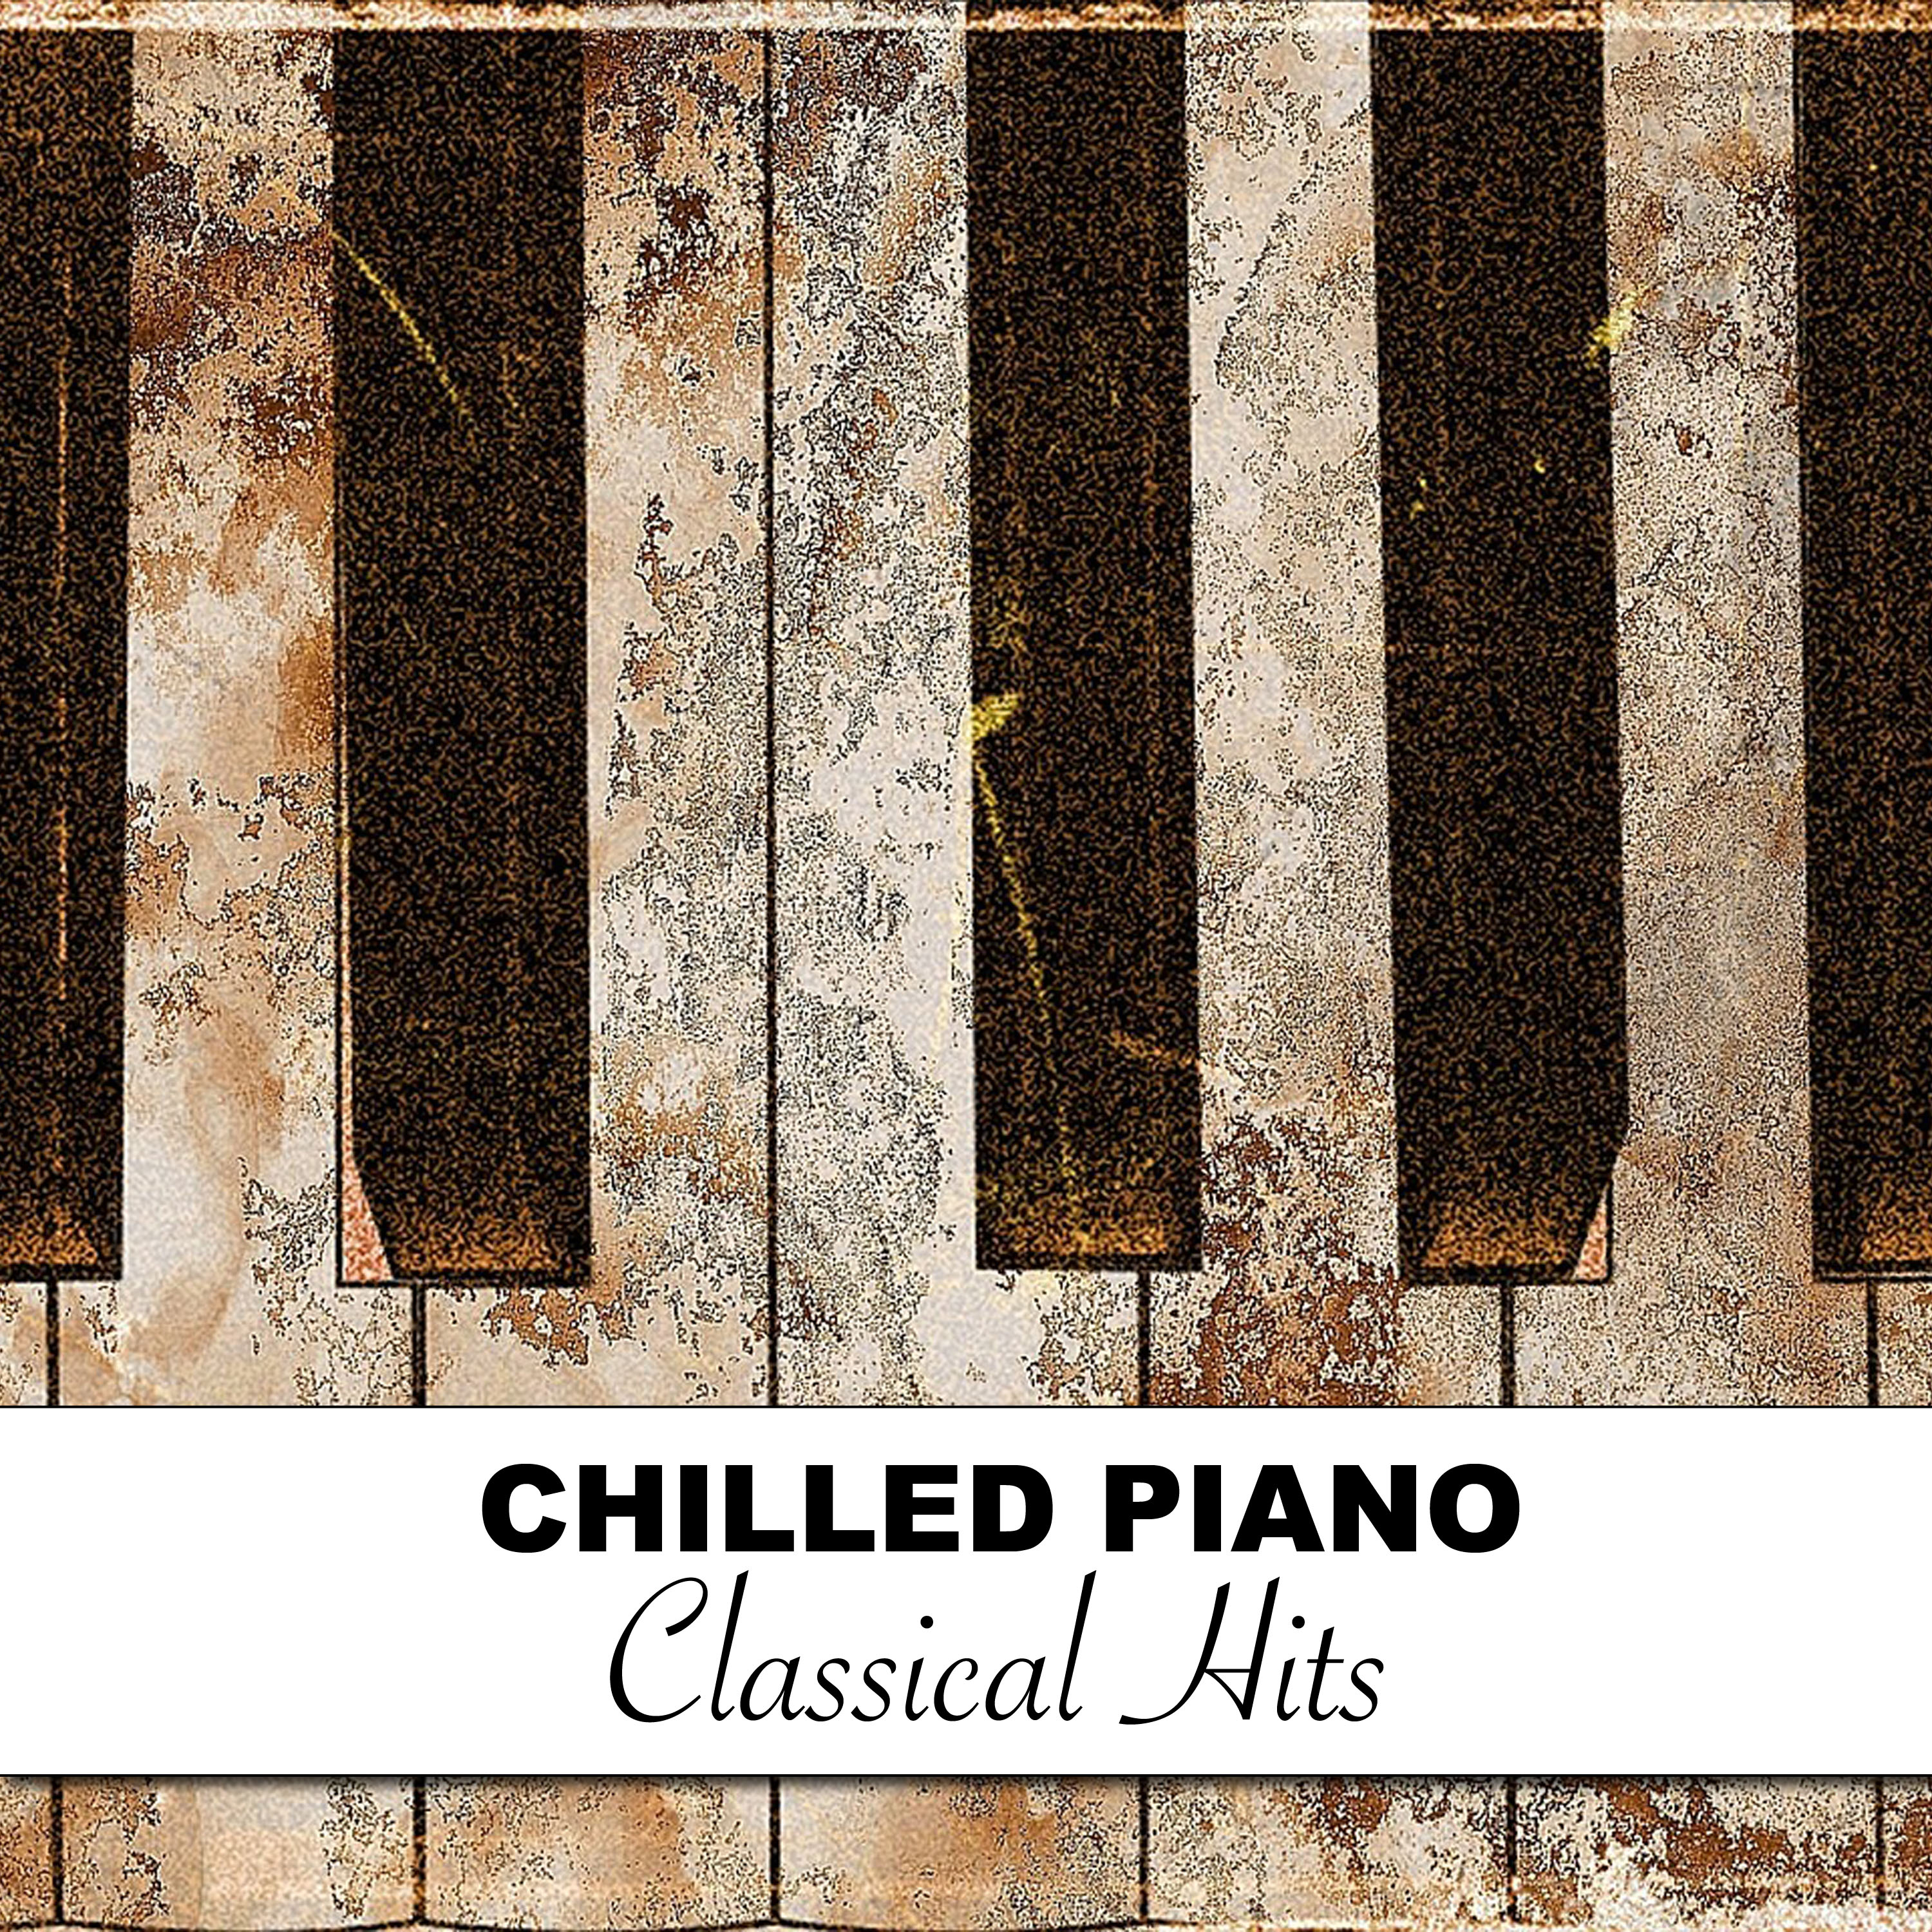 #10 Chilled Piano Classical Hits